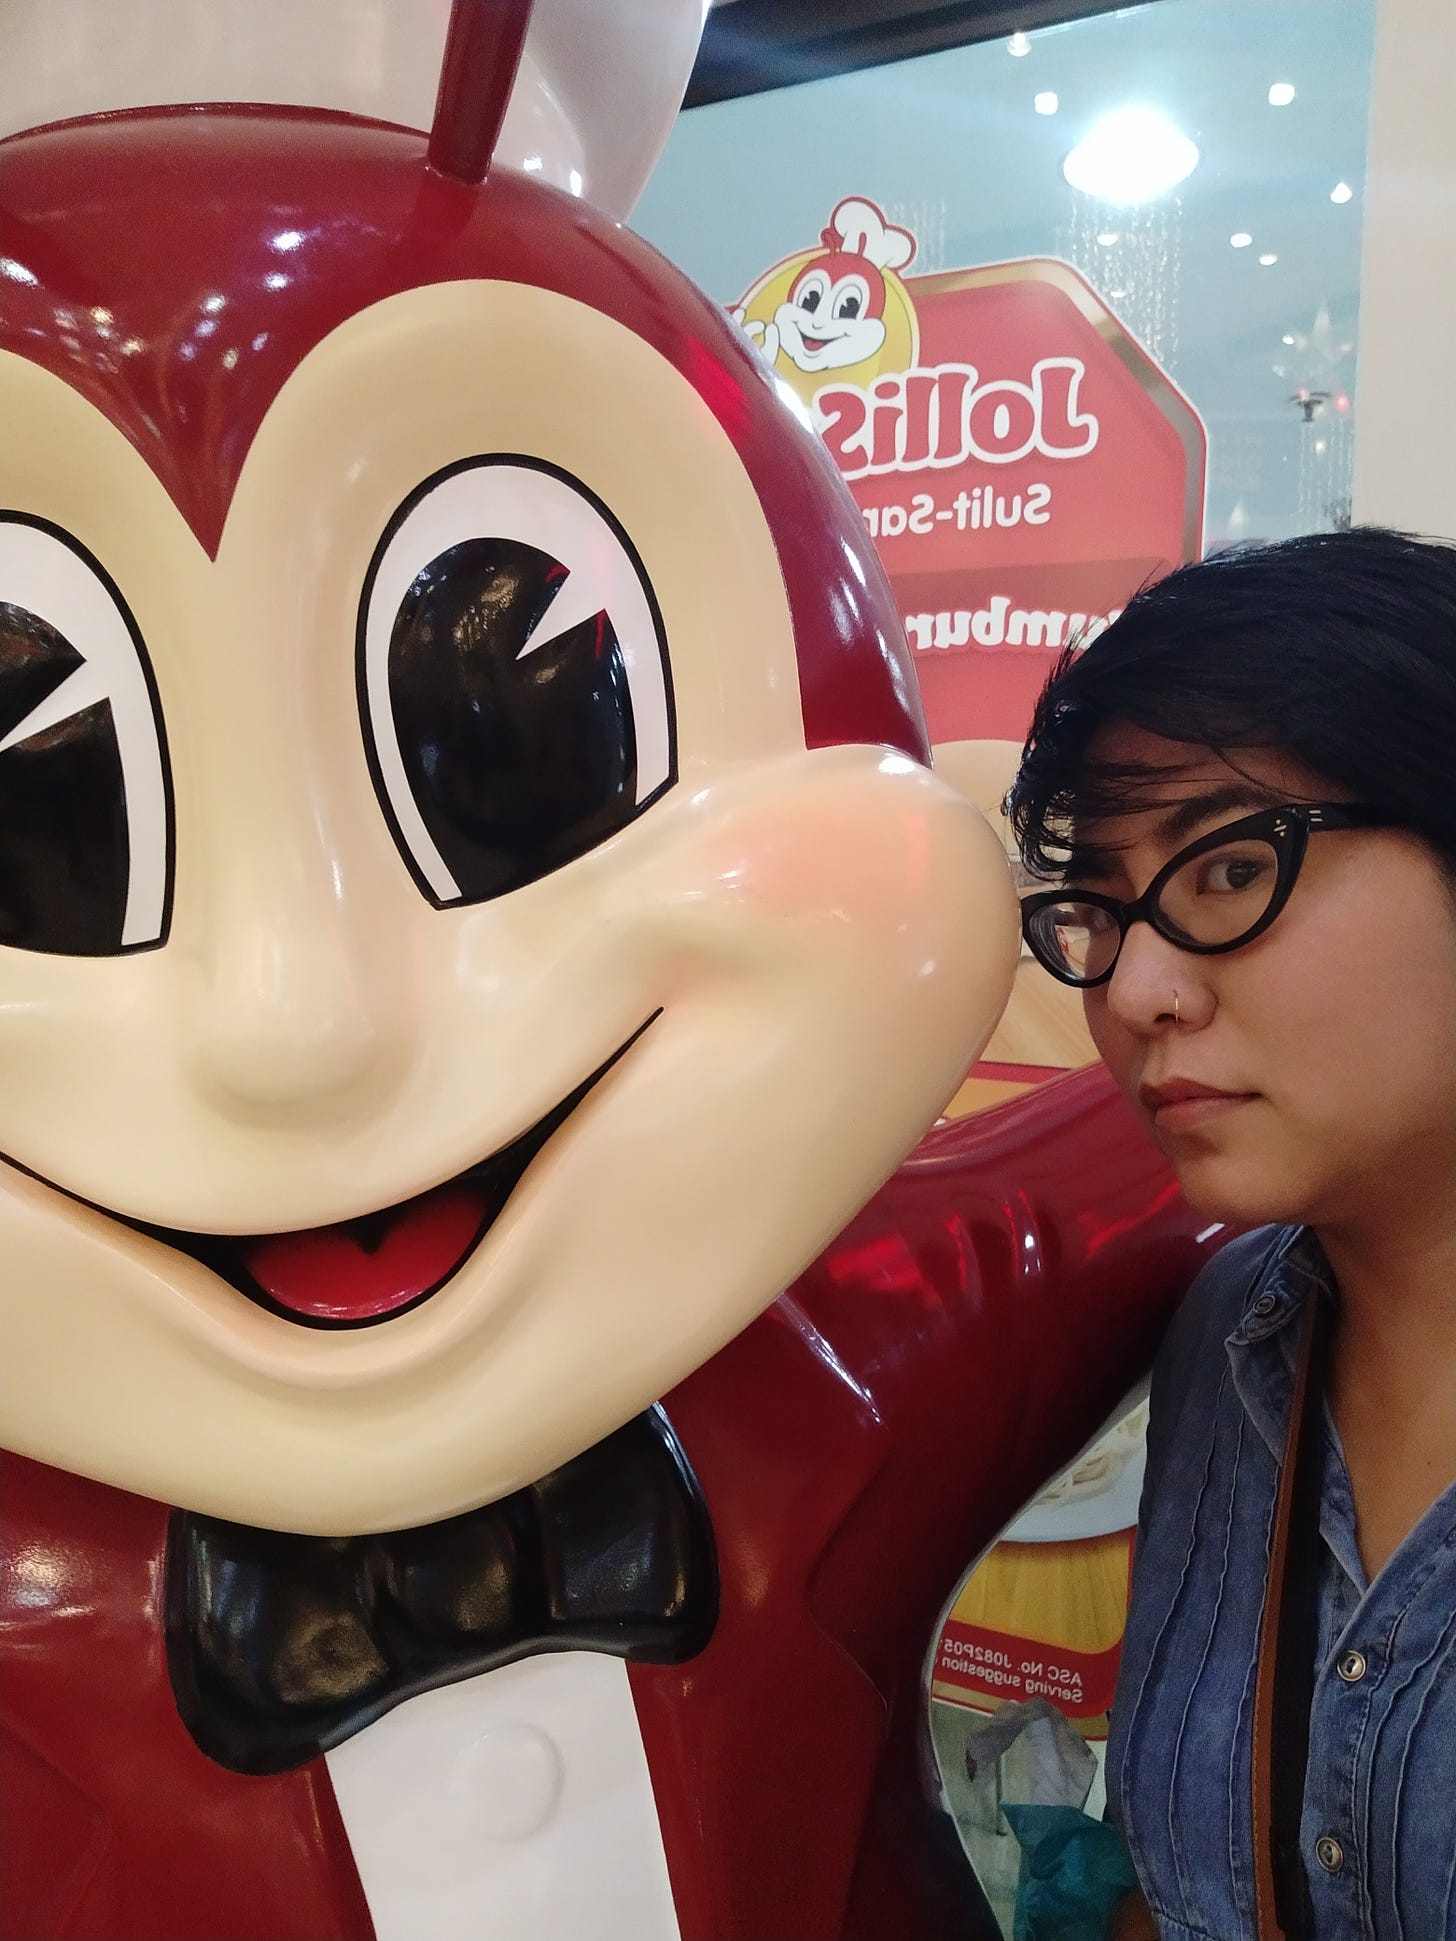    A photo from December 2018. Miranda, with short hair, black cats eye glasses and a nose ring in a denim shirt, poses next to a giant Jollibee statue. His smile is creepily huge. His arm is around Miranda's shoulders.